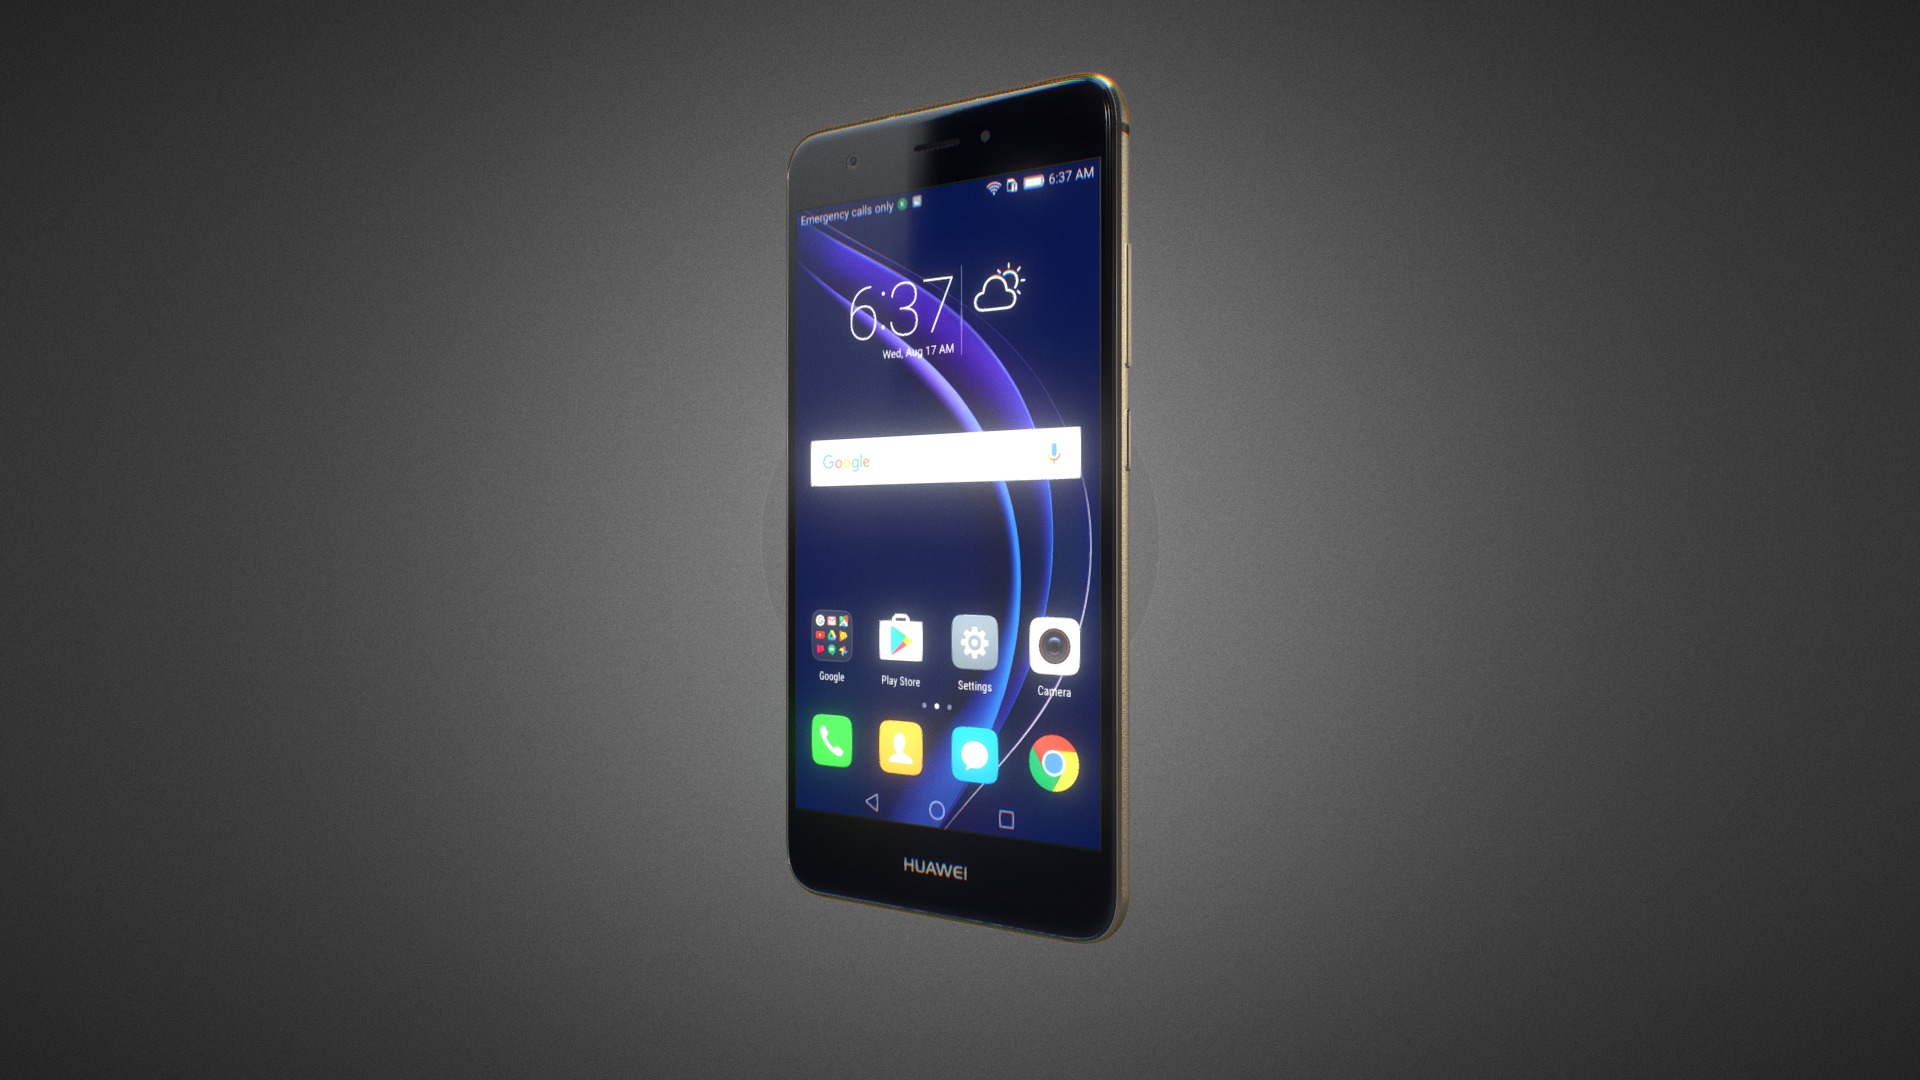 3D model Huawei Nova for Element 3D - This is a 3D model of the Huawei Nova for Element 3D. The 3D model is about a black smartphone with a blue screen.